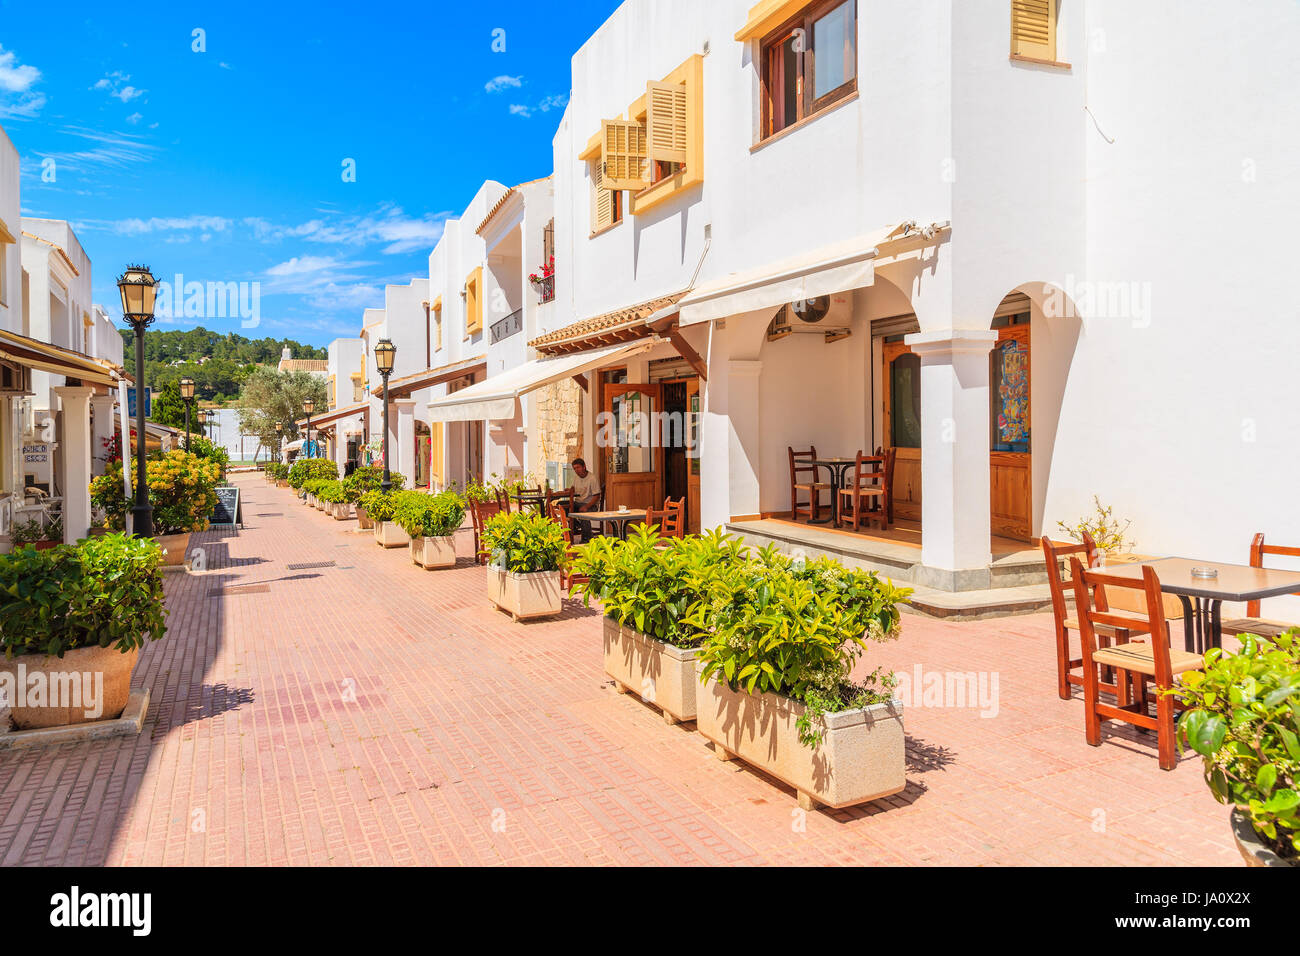 IBIZA ISLAND, SPAIN - MAY 18, 2017: street with typical architecture of Sant Carles de Peralta village with whitewashed houses, Ibiza island, Spain. Stock Photo